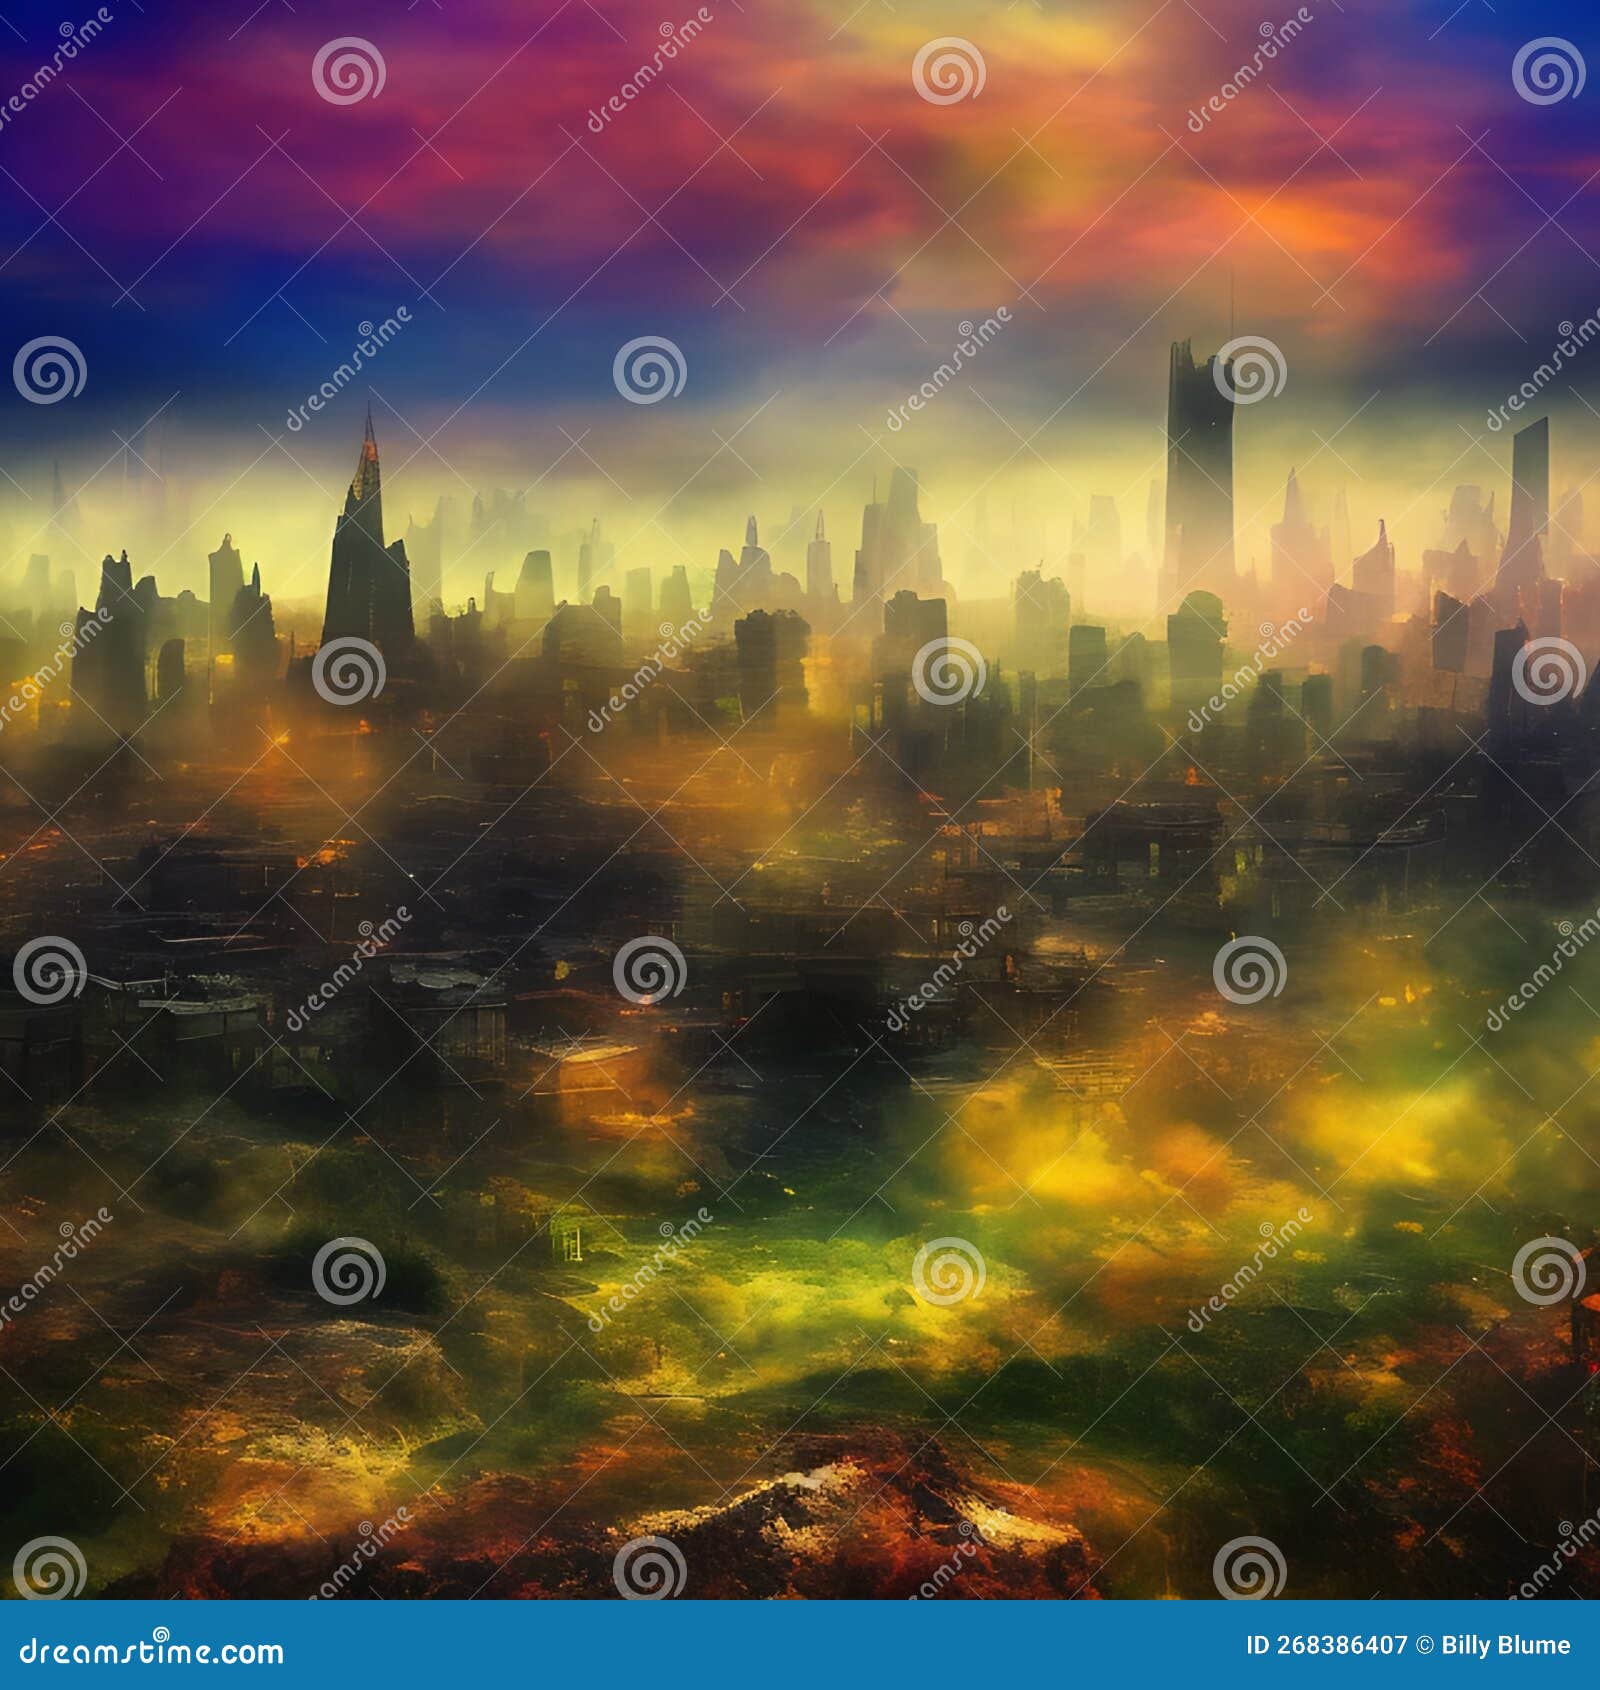 Abstract Fictional Scary Dark Wasteland City Background Deep Colorful